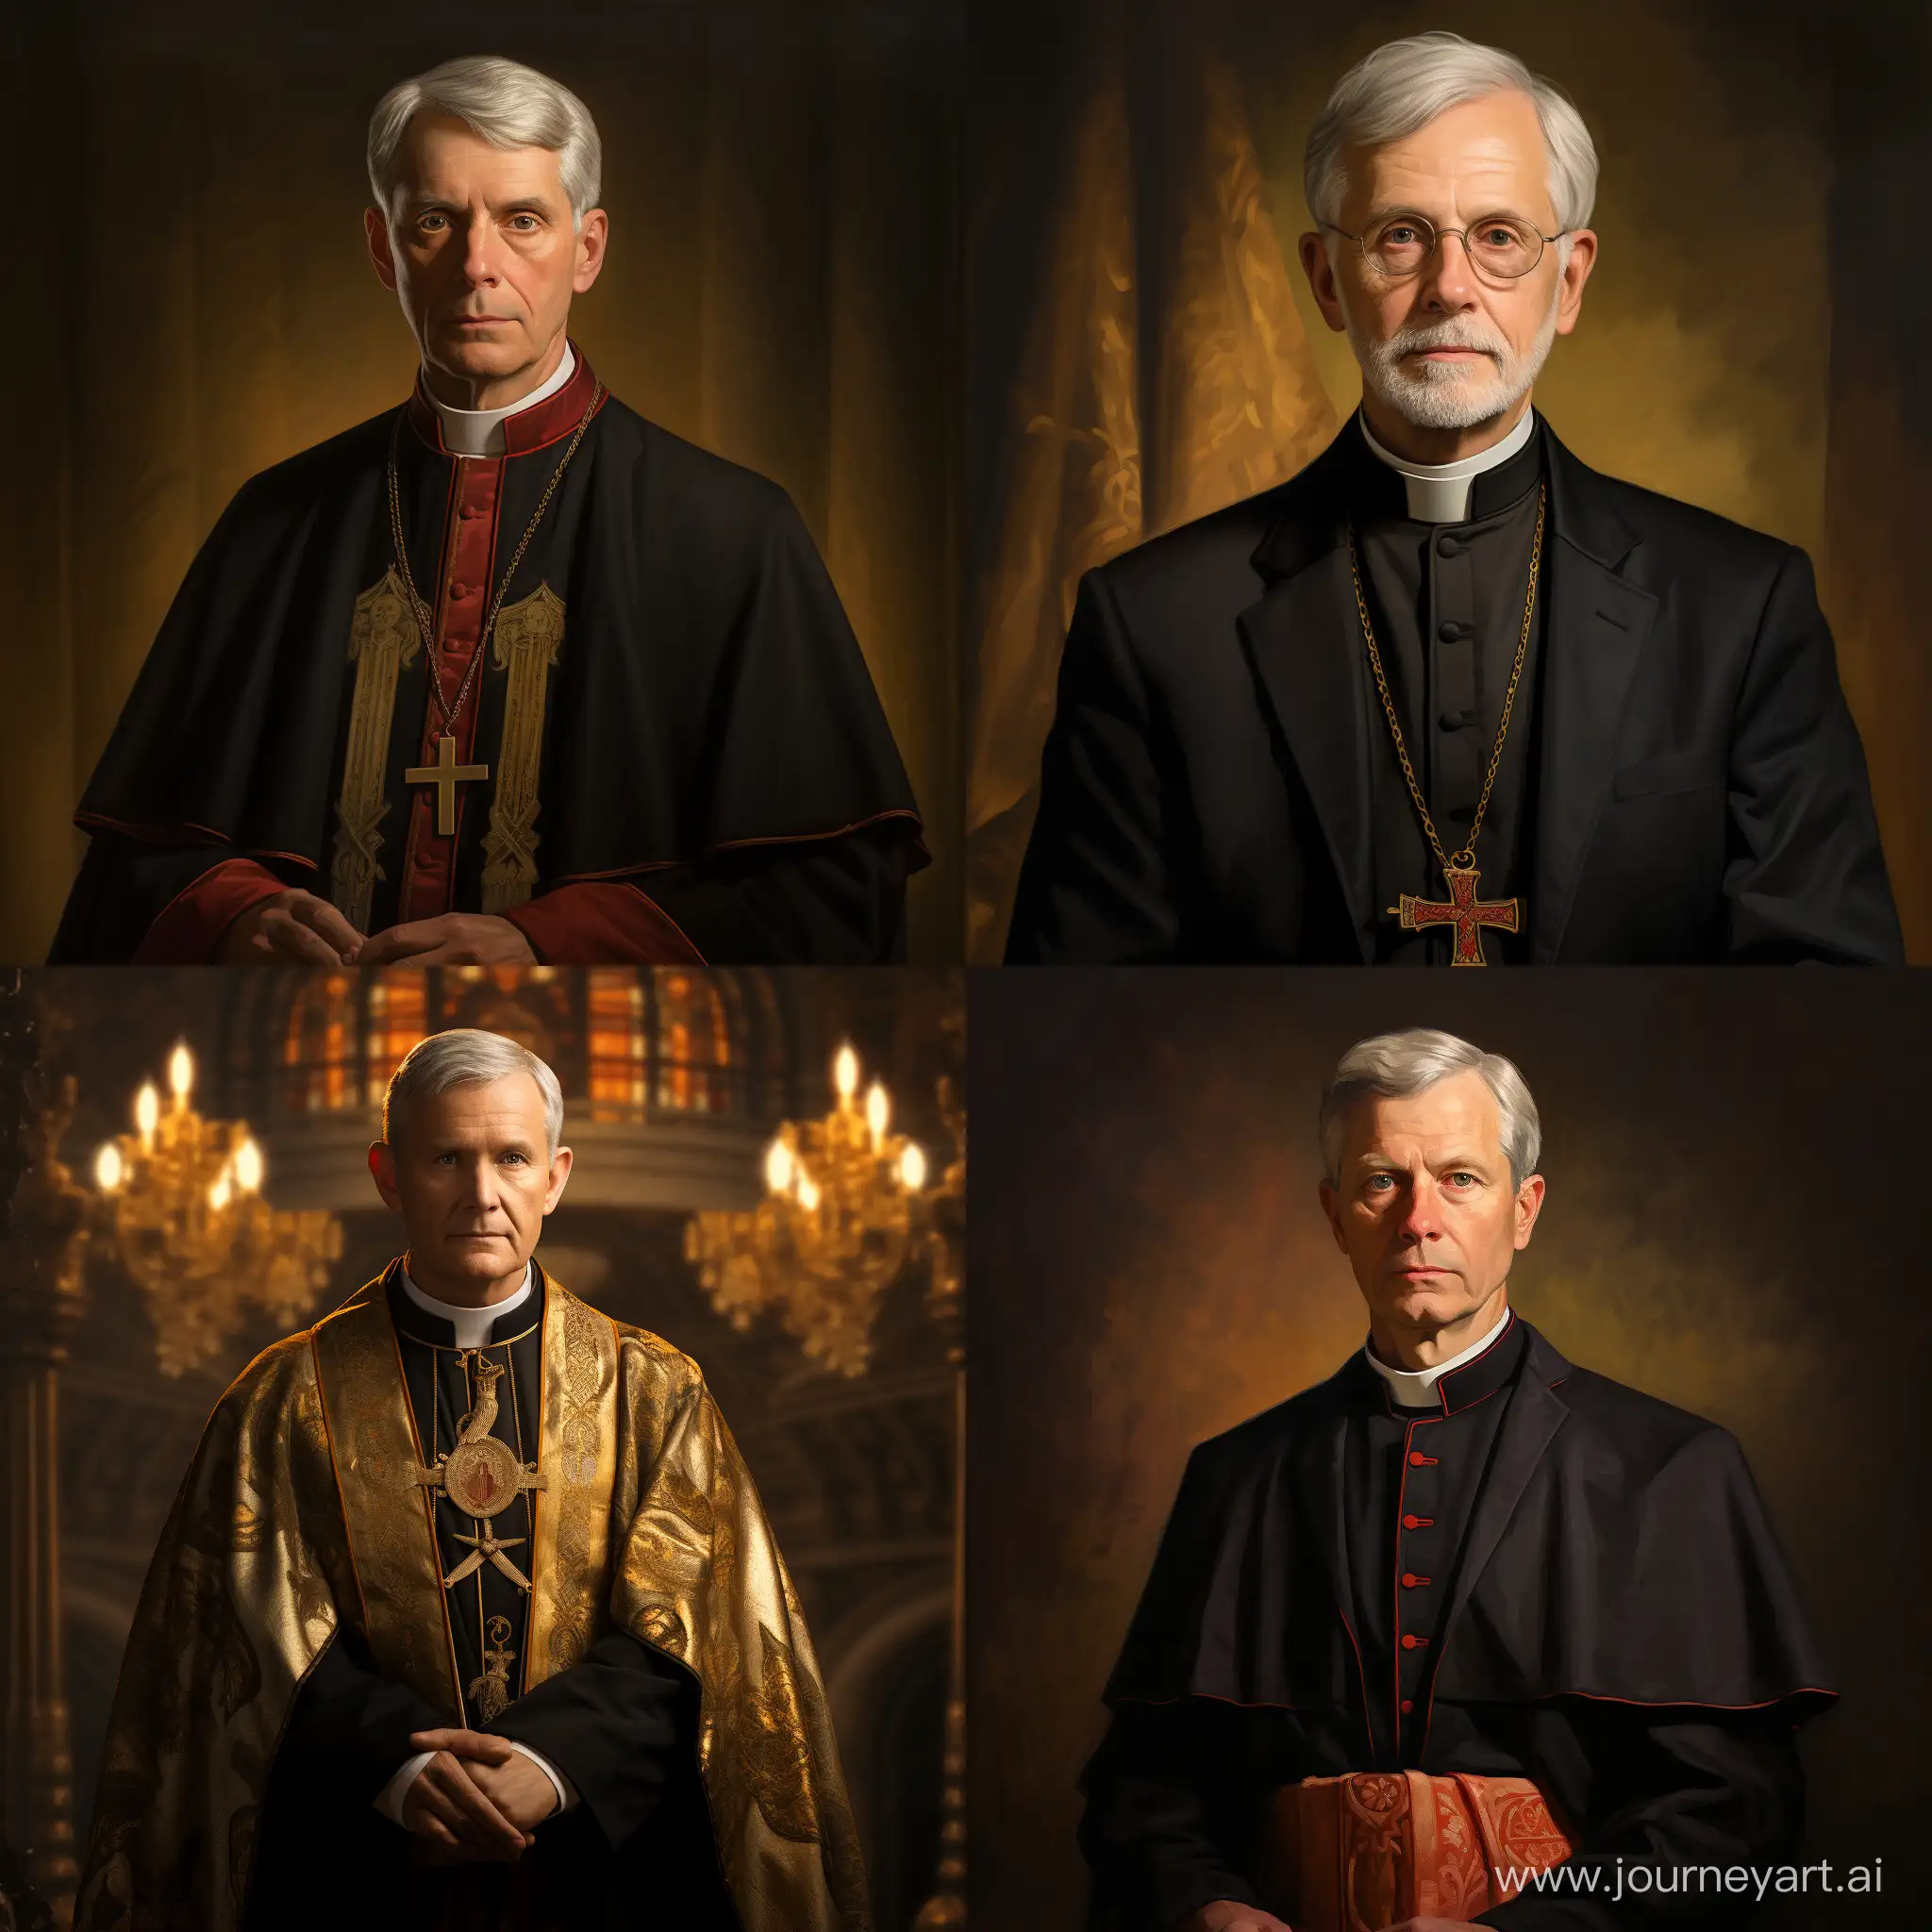 Subject: In this AI-generated image, the central figure is a silver-haired young bishop, exuding an air of sophistication and authority. The individual is prominently featured, serving as the focal point of the composition. Setting: The bishop is captured in a 1:1 aspect ratio, providing a balanced and visually appealing frame. The background complements the subject, ensuring that the character's unique attire stands out against a subtle backdrop. Style/Coloring: The style is detailed and realistic, showcasing the intricate design of the bishop's ecclesiastical garments. The color palette is rich, with a focus on the vibrant purple velvet skirt that adds a touch of regality and individuality to the ensemble. Action or Items: The bishop is not engaged in any specific action, allowing the viewer to appreciate the detailed attire. The absence of specific items emphasizes the character's presence and attire. Costume or Appearance: The bishop's attire is a blend of traditional ecclesiastical garments and a modern twist with the unconventional purple velvet skirt, creating a visually striking and memorable look. Accessories: Apart from the traditional bishop attire, no additional accessories are present, emphasizing the uniqueness of the purple velvet skirt.